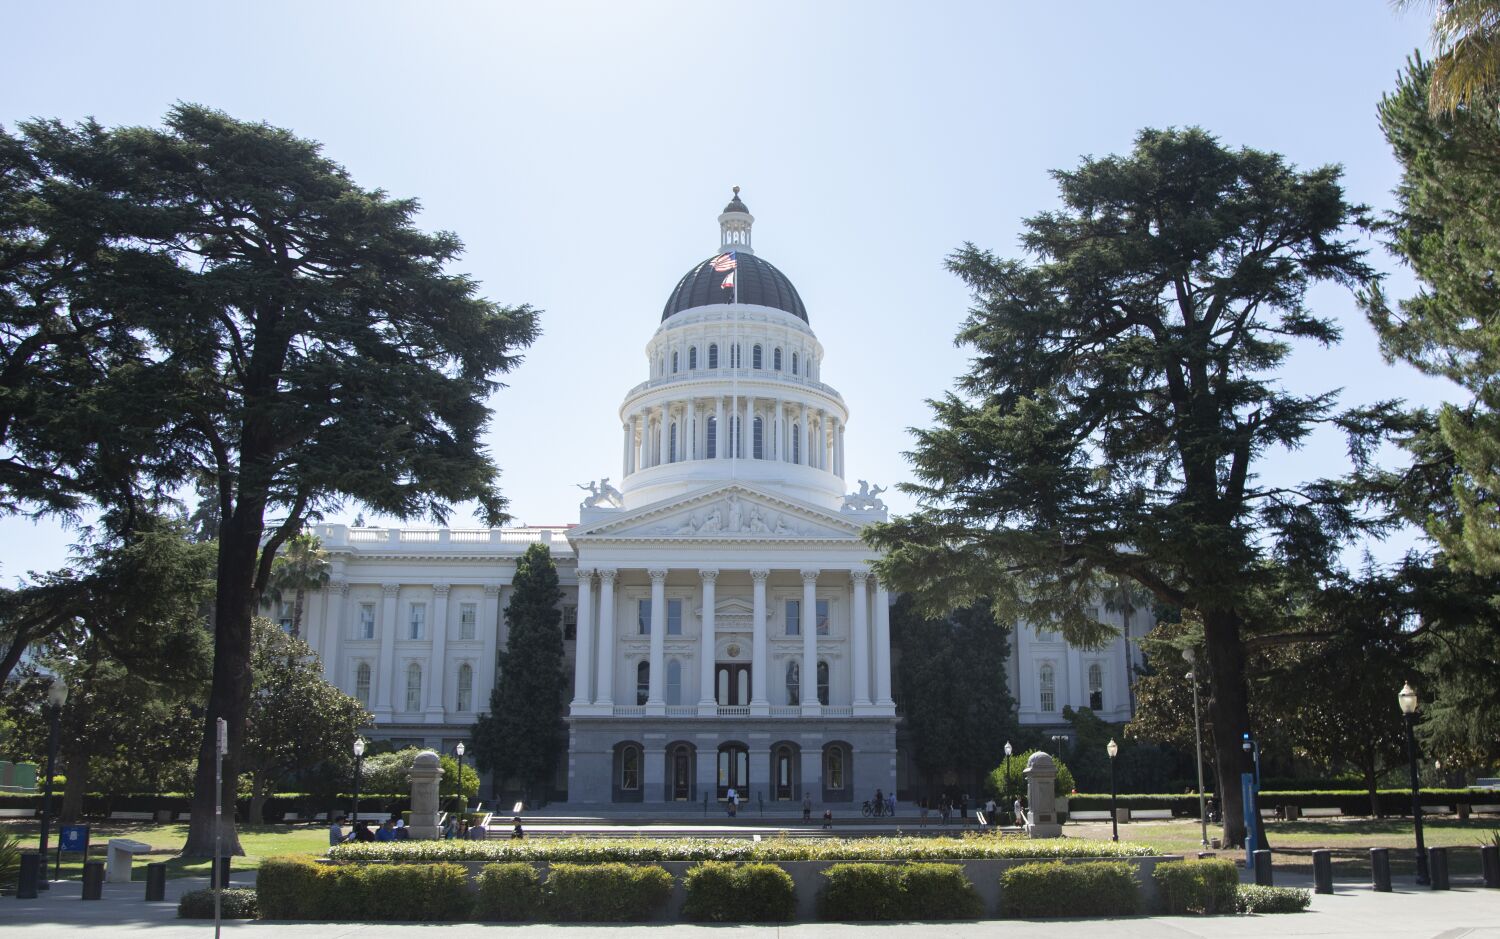 Column: A costly project showed California politicians think they own the Capitol. A court reminded them they don't